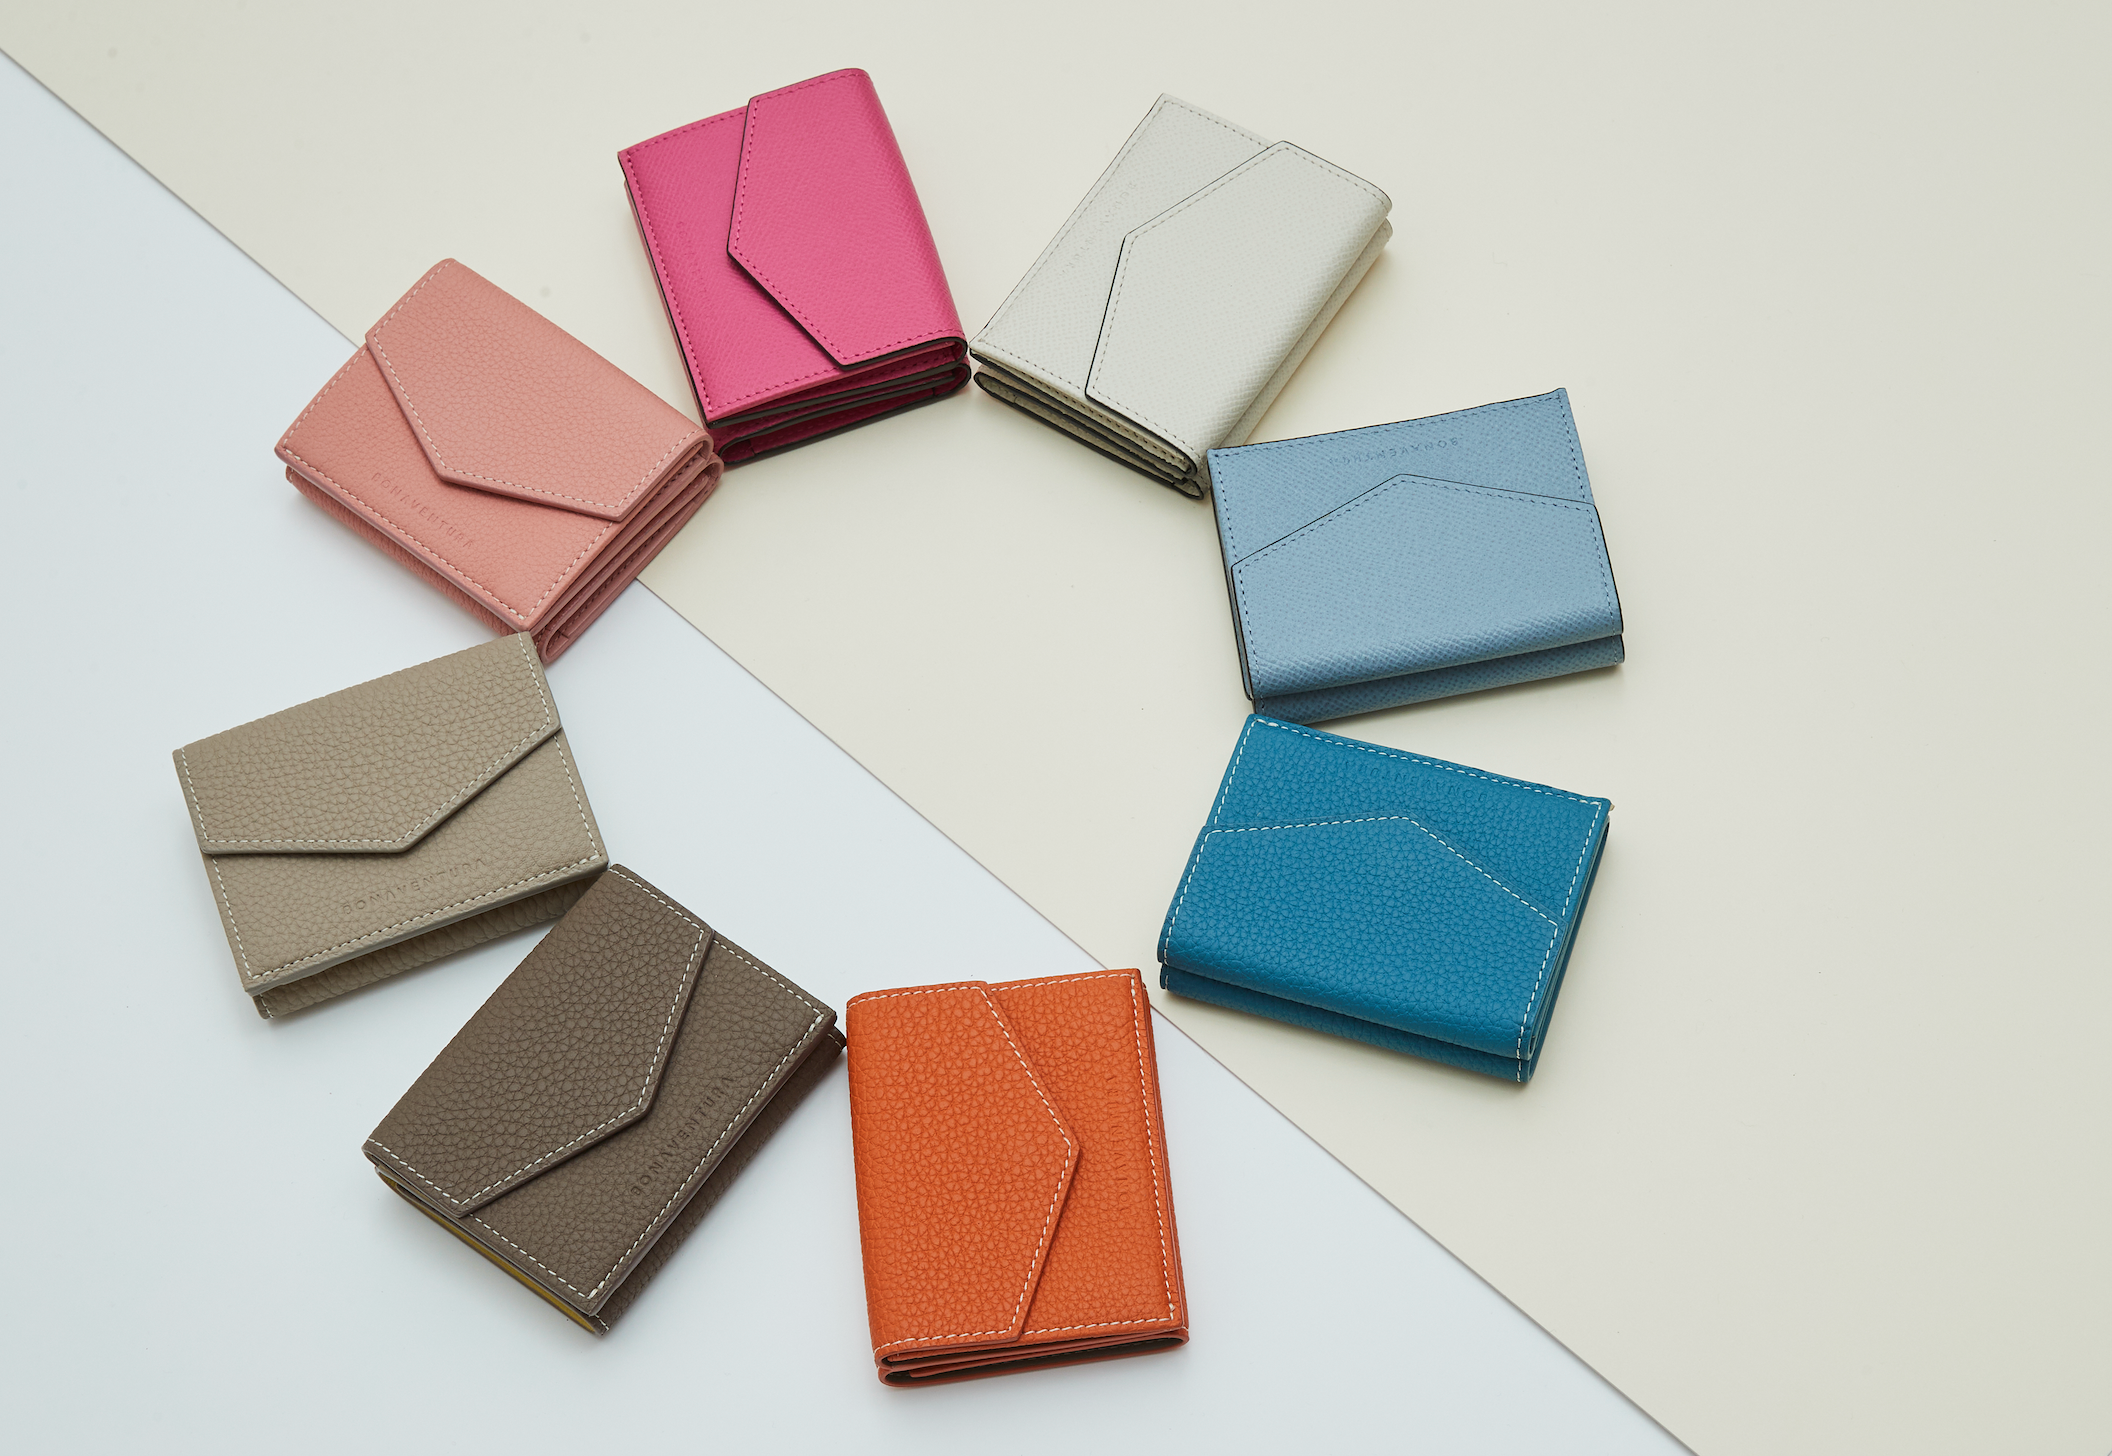 A wide selection of women's wallets from BONAVENTURA in various colors.